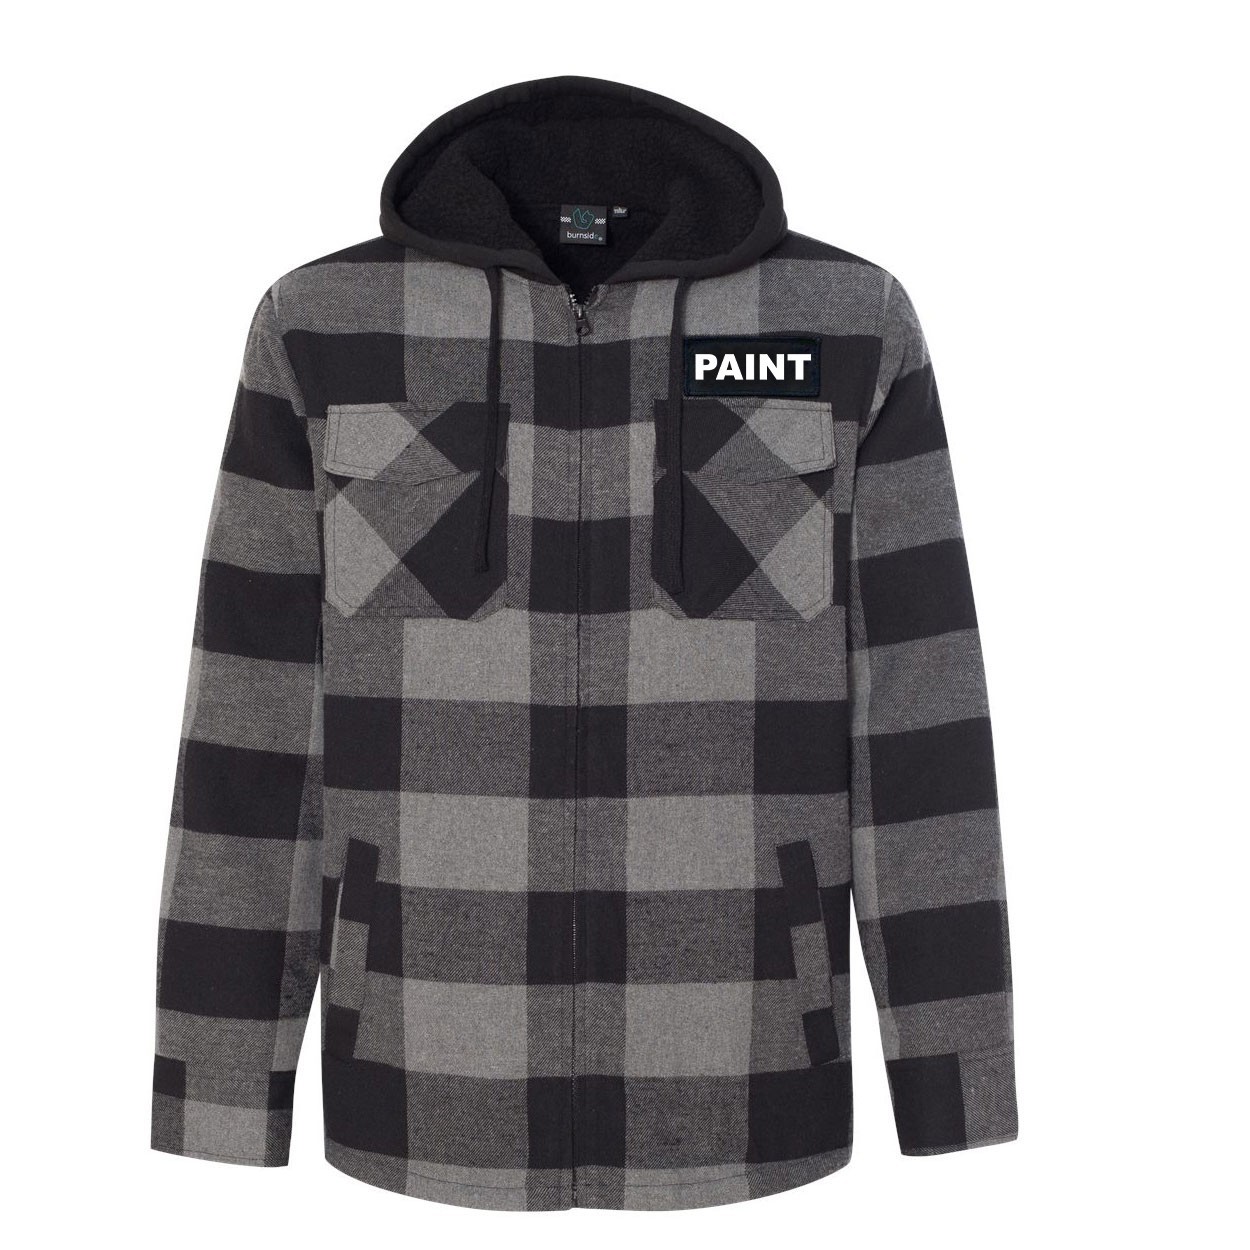 Paint Brand Logo Classic Unisex Full Zip Woven Patch Hooded Flannel Jacket Black/Gray (White Logo)